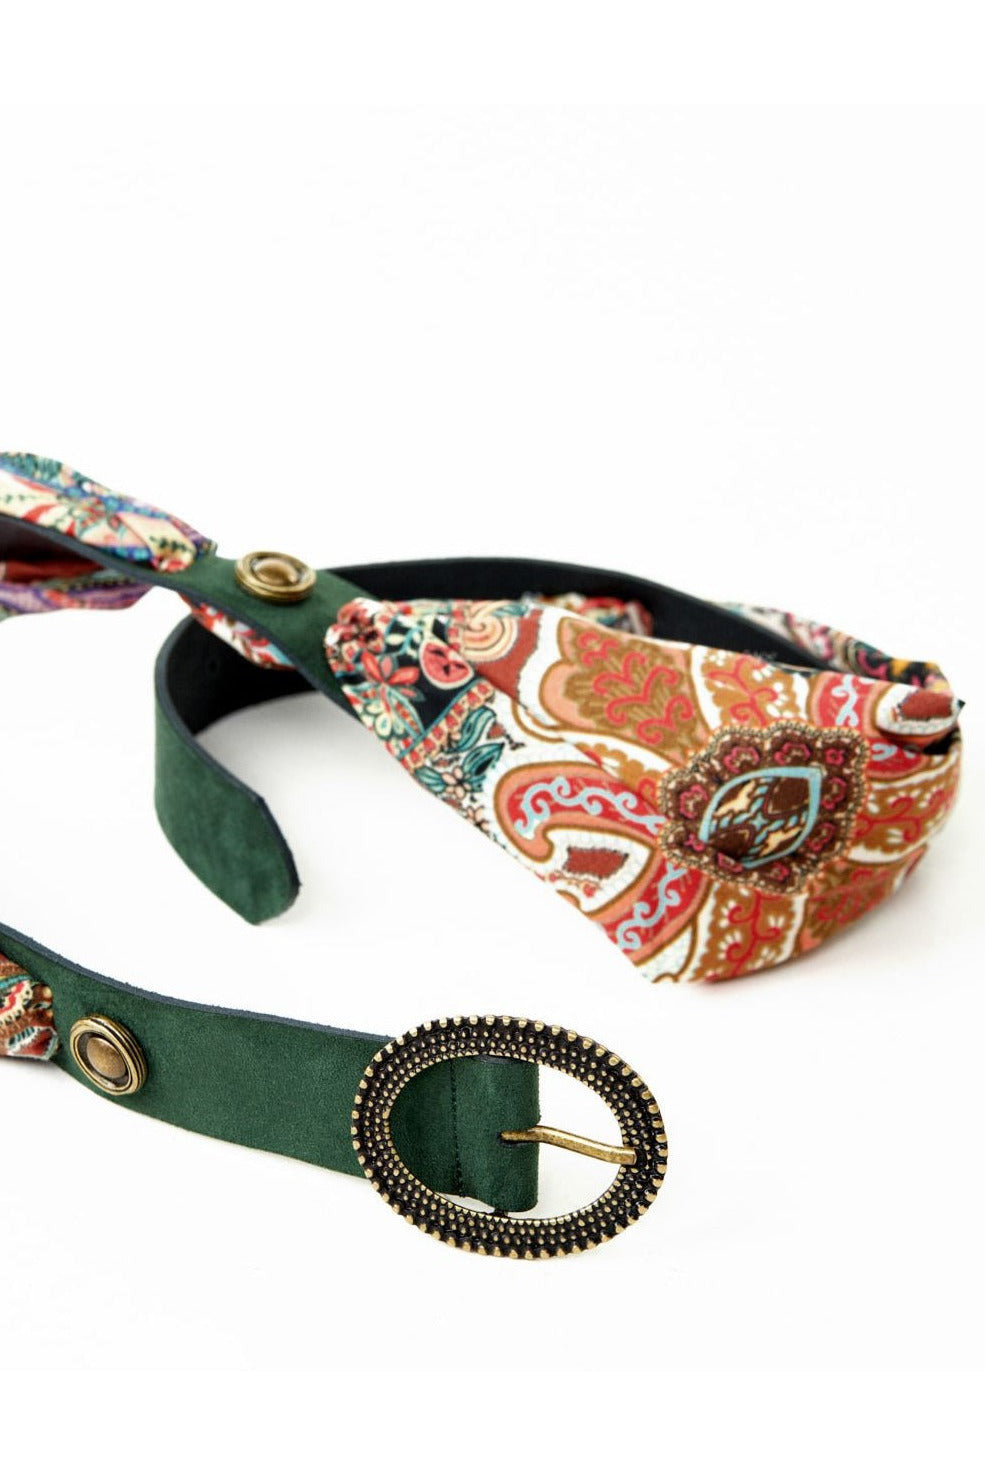 PASLEY AND LEATHER PRINTED BELT